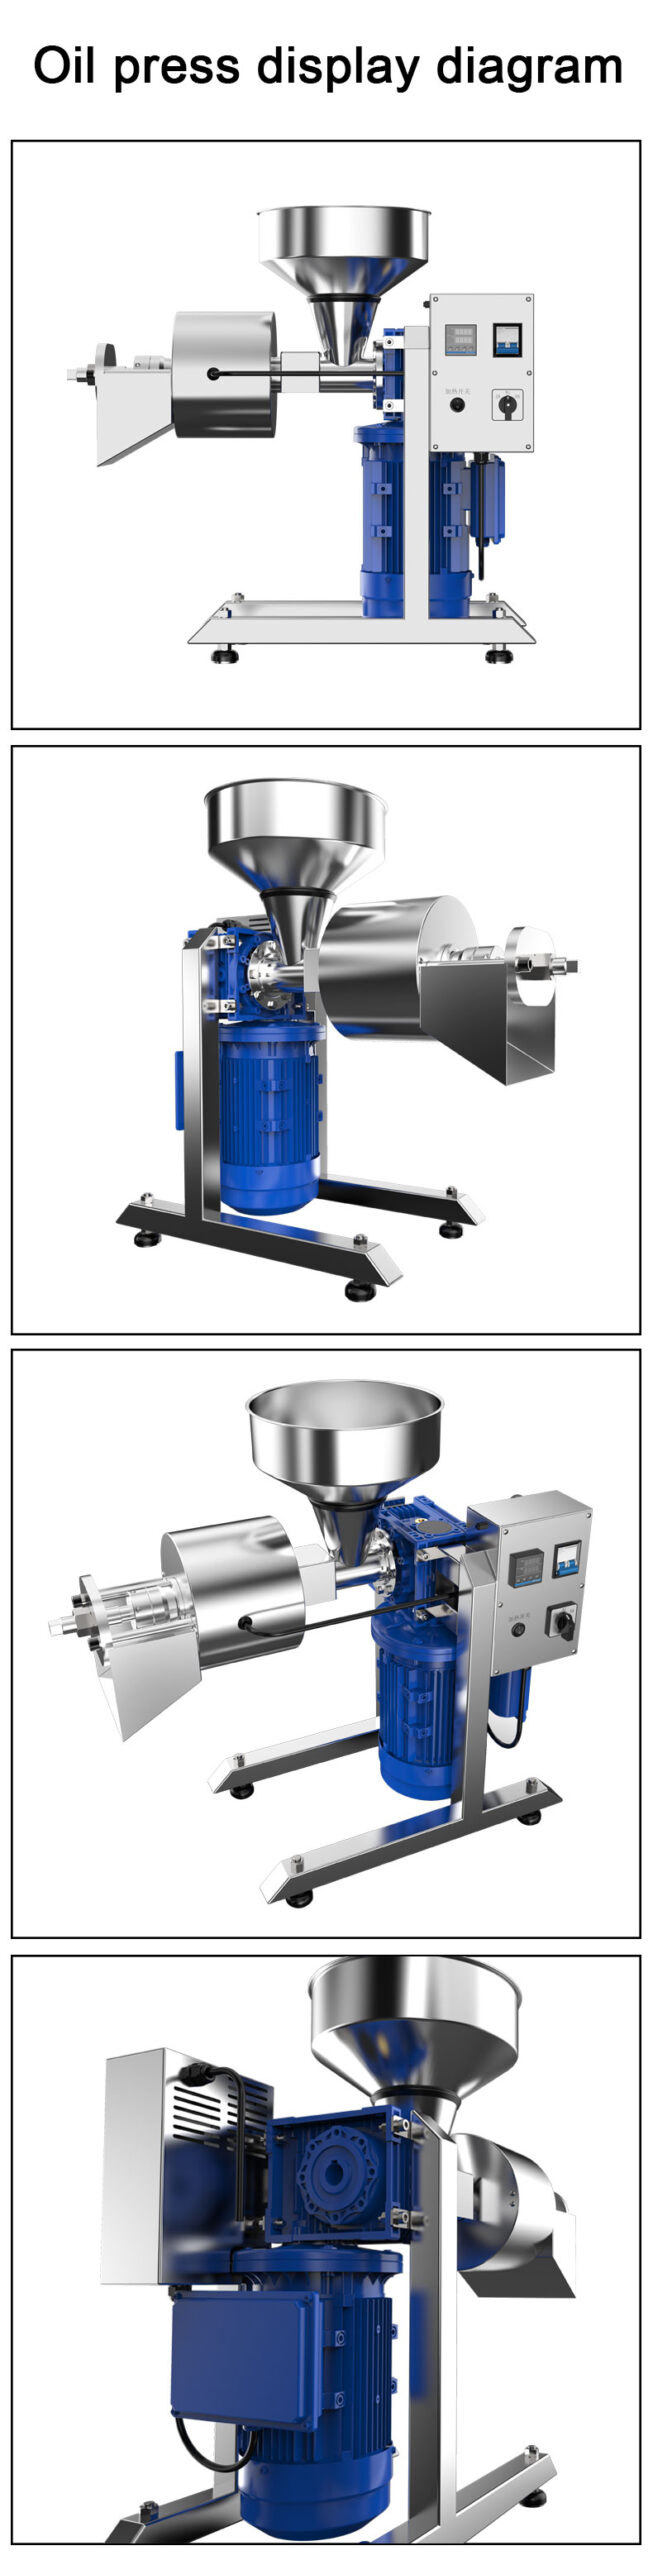 S05 stainless steel intelligent oil press  capacity 15-20kg/h - Commercial Using Noodel Machine - 9